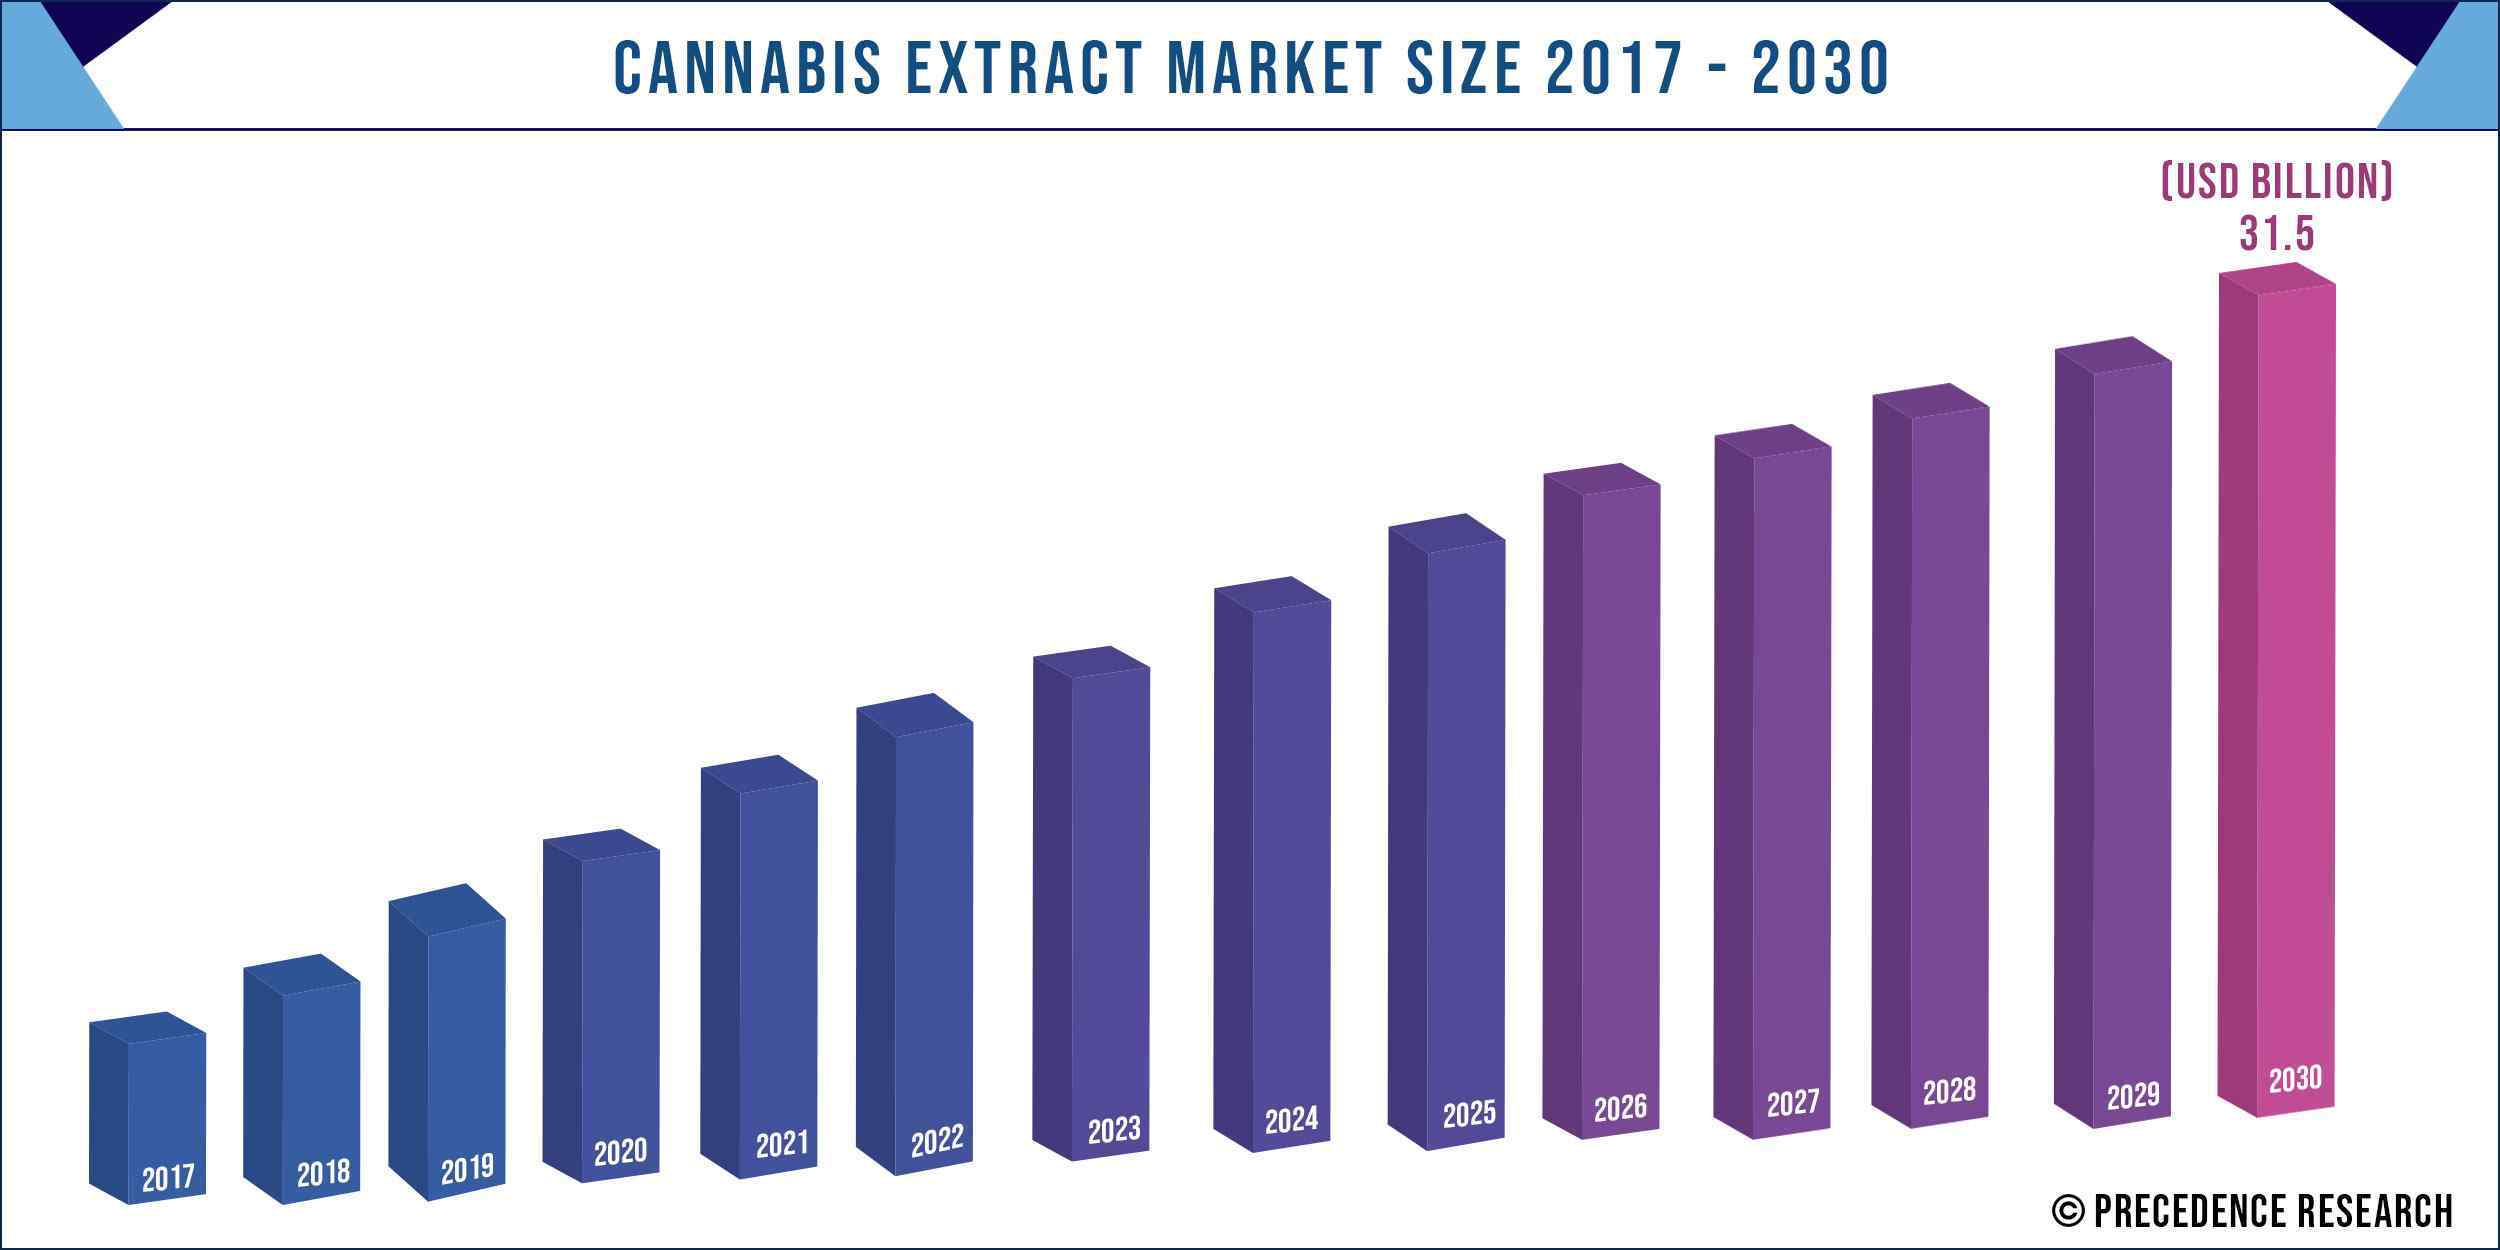 Cannabis Extract Market Size 2017 to 2030